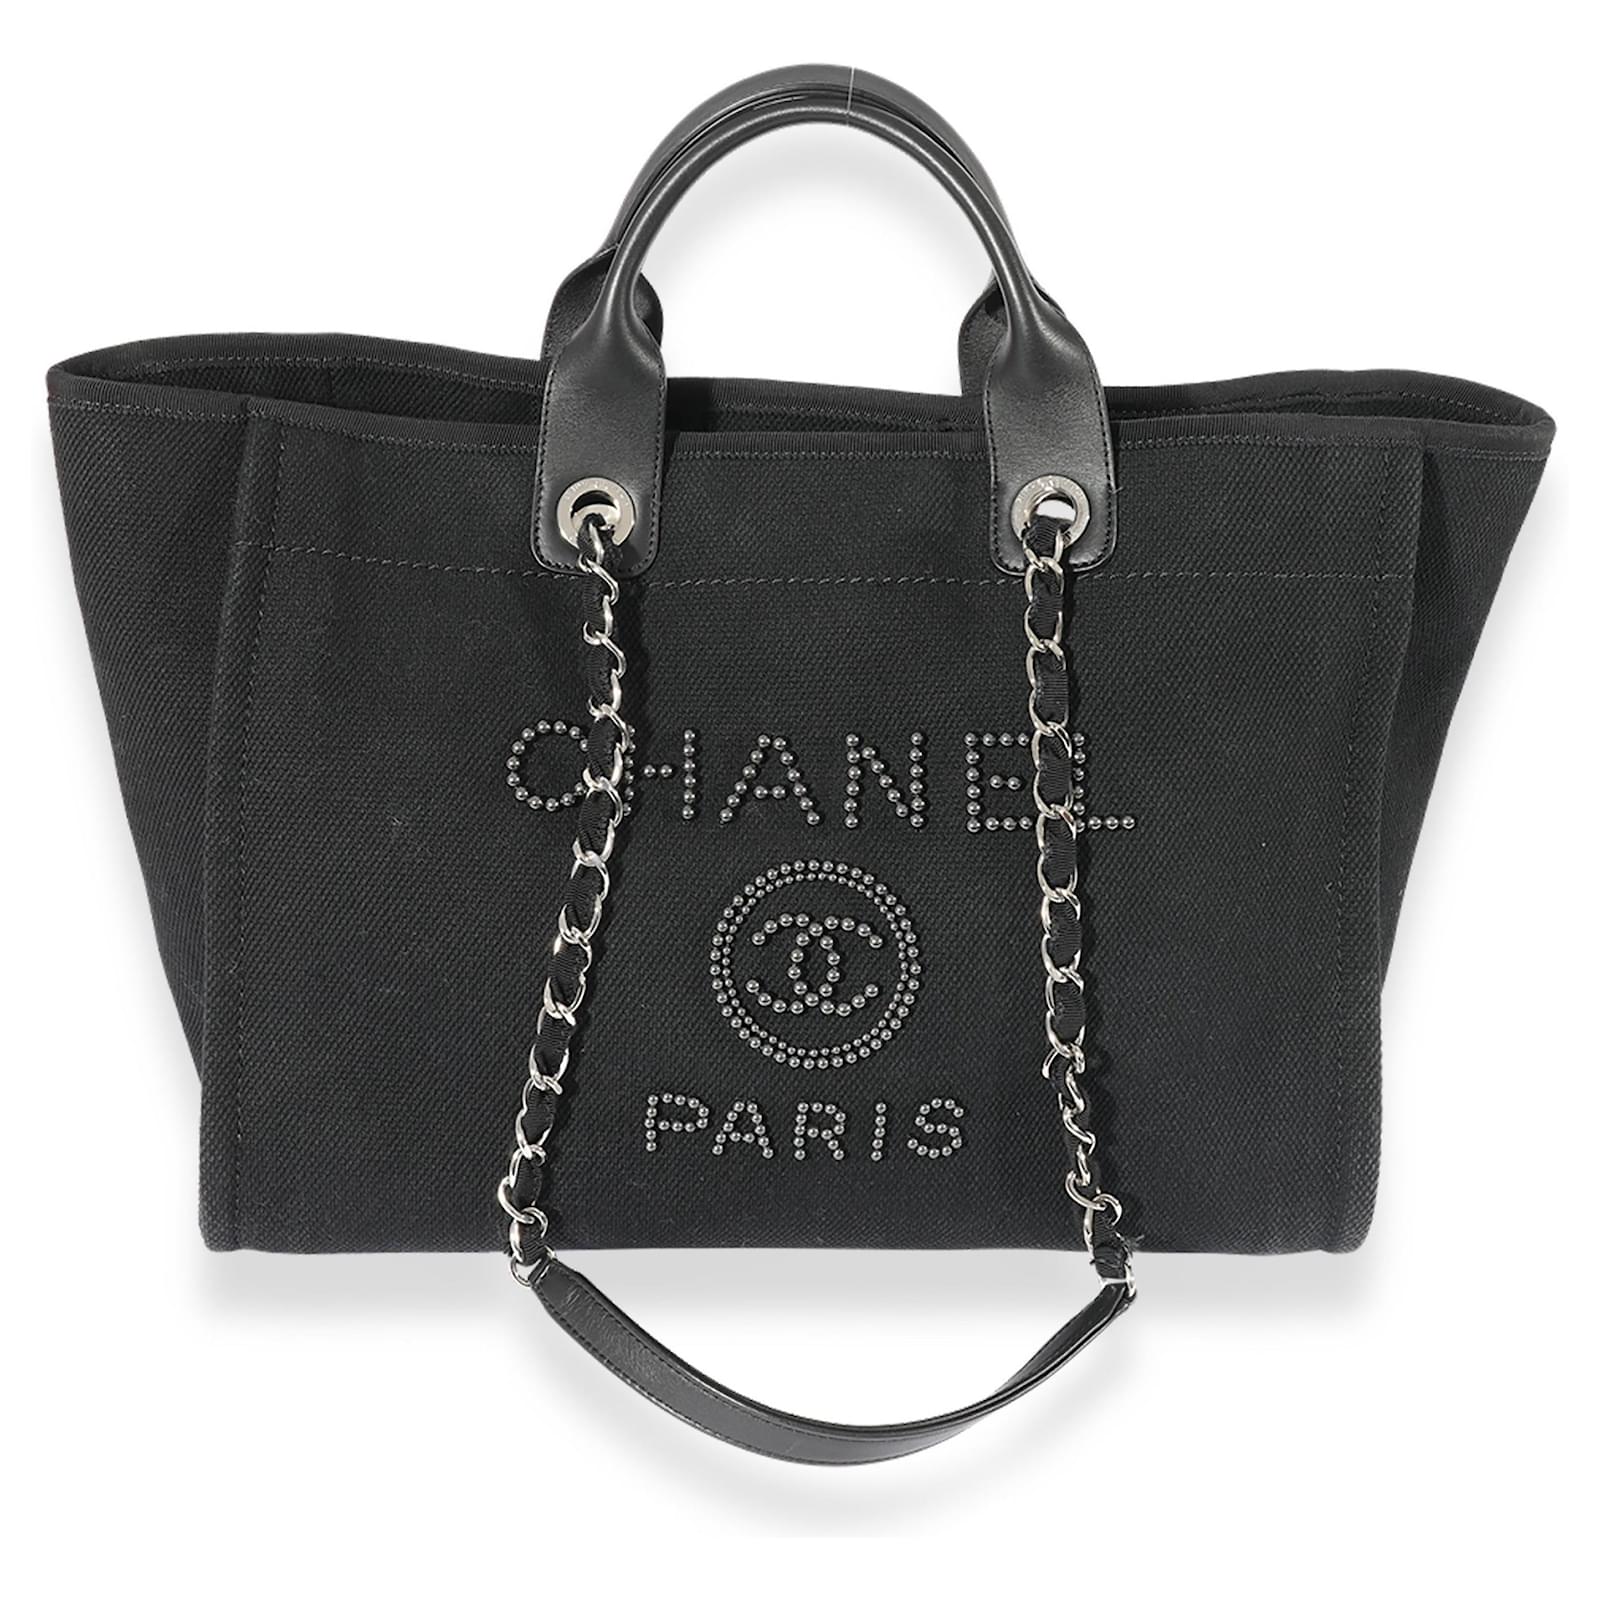 large chanel deauville tote bag